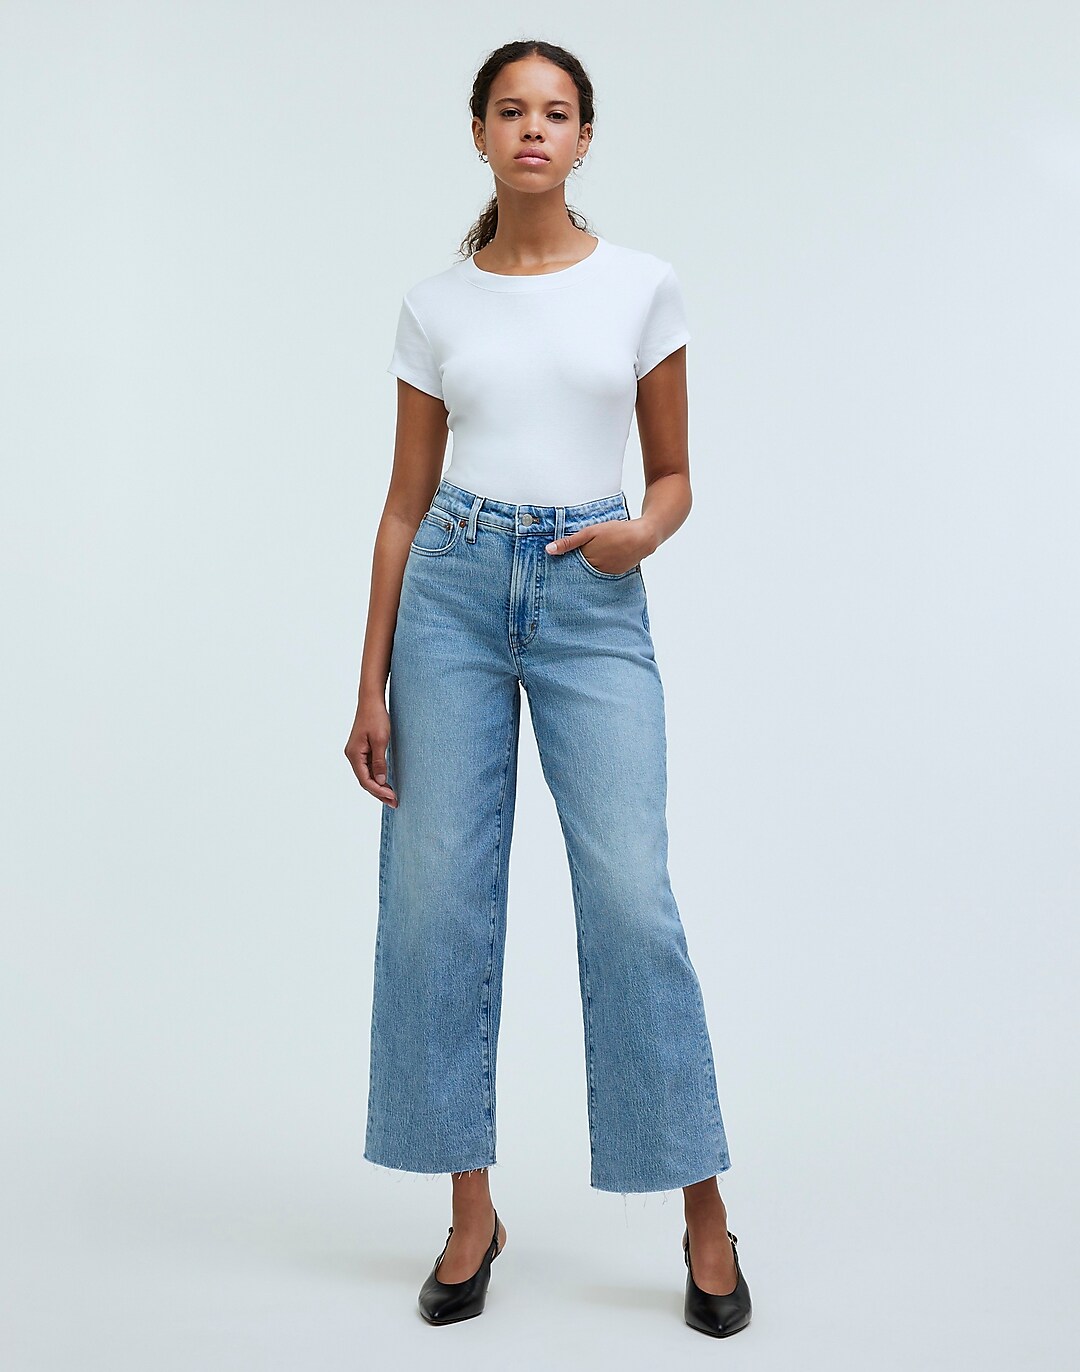 The Tall Curvy Perfect Vintage Wide-Leg Crop Jean in Altoona Wash